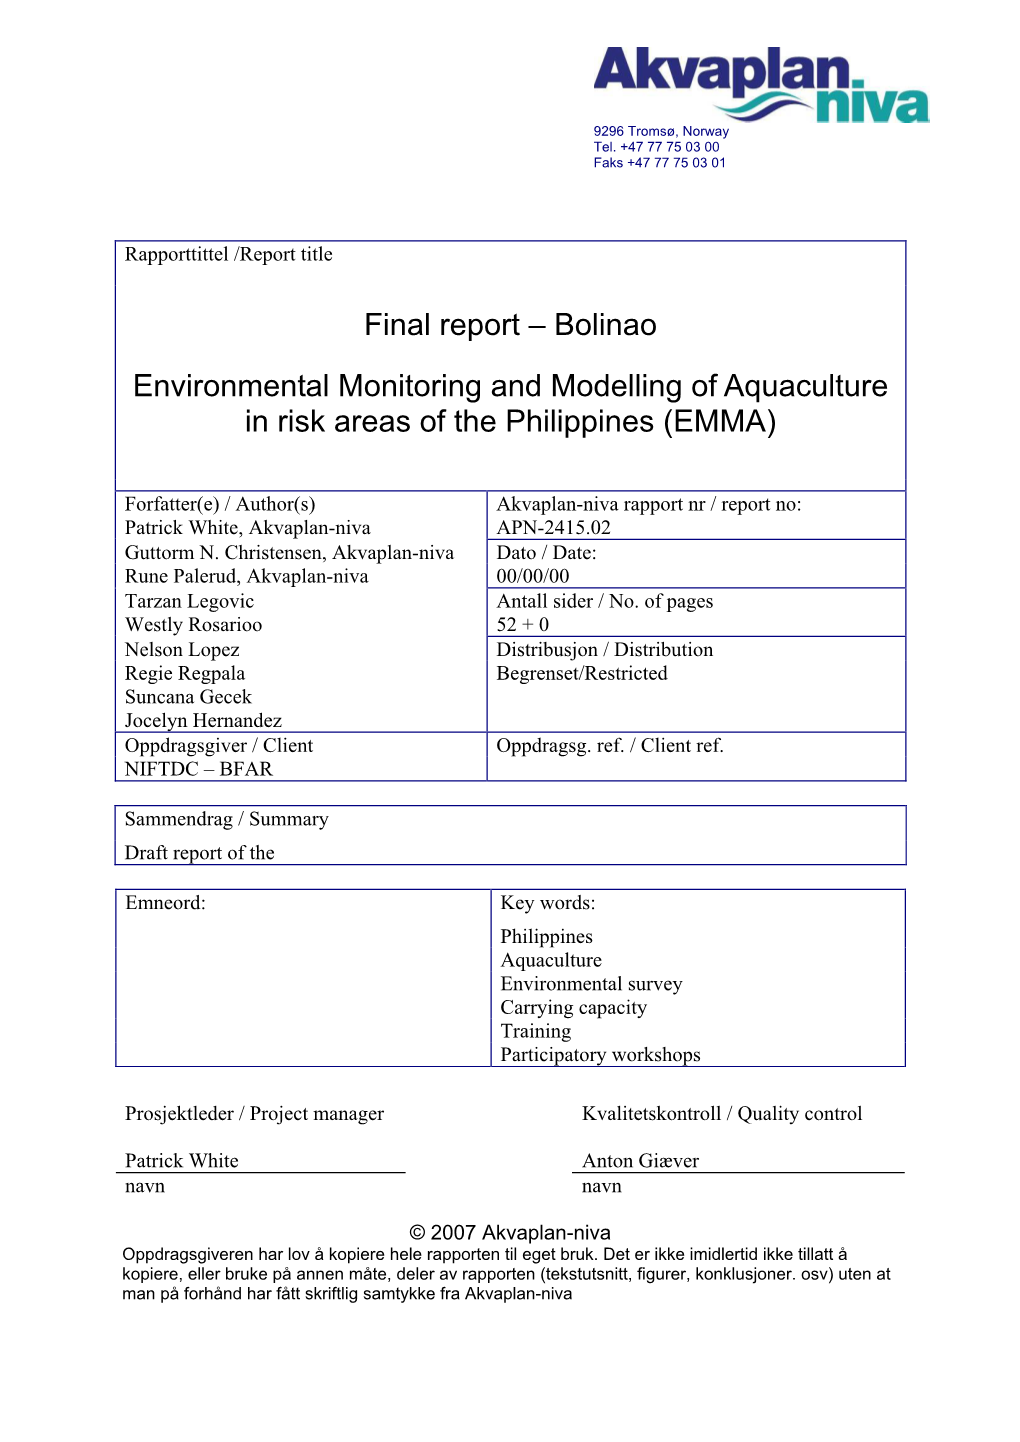 Final Report – Bolinao Environmental Monitoring and Modelling of Aquaculture in Risk Areas of the Philippines (EMMA)